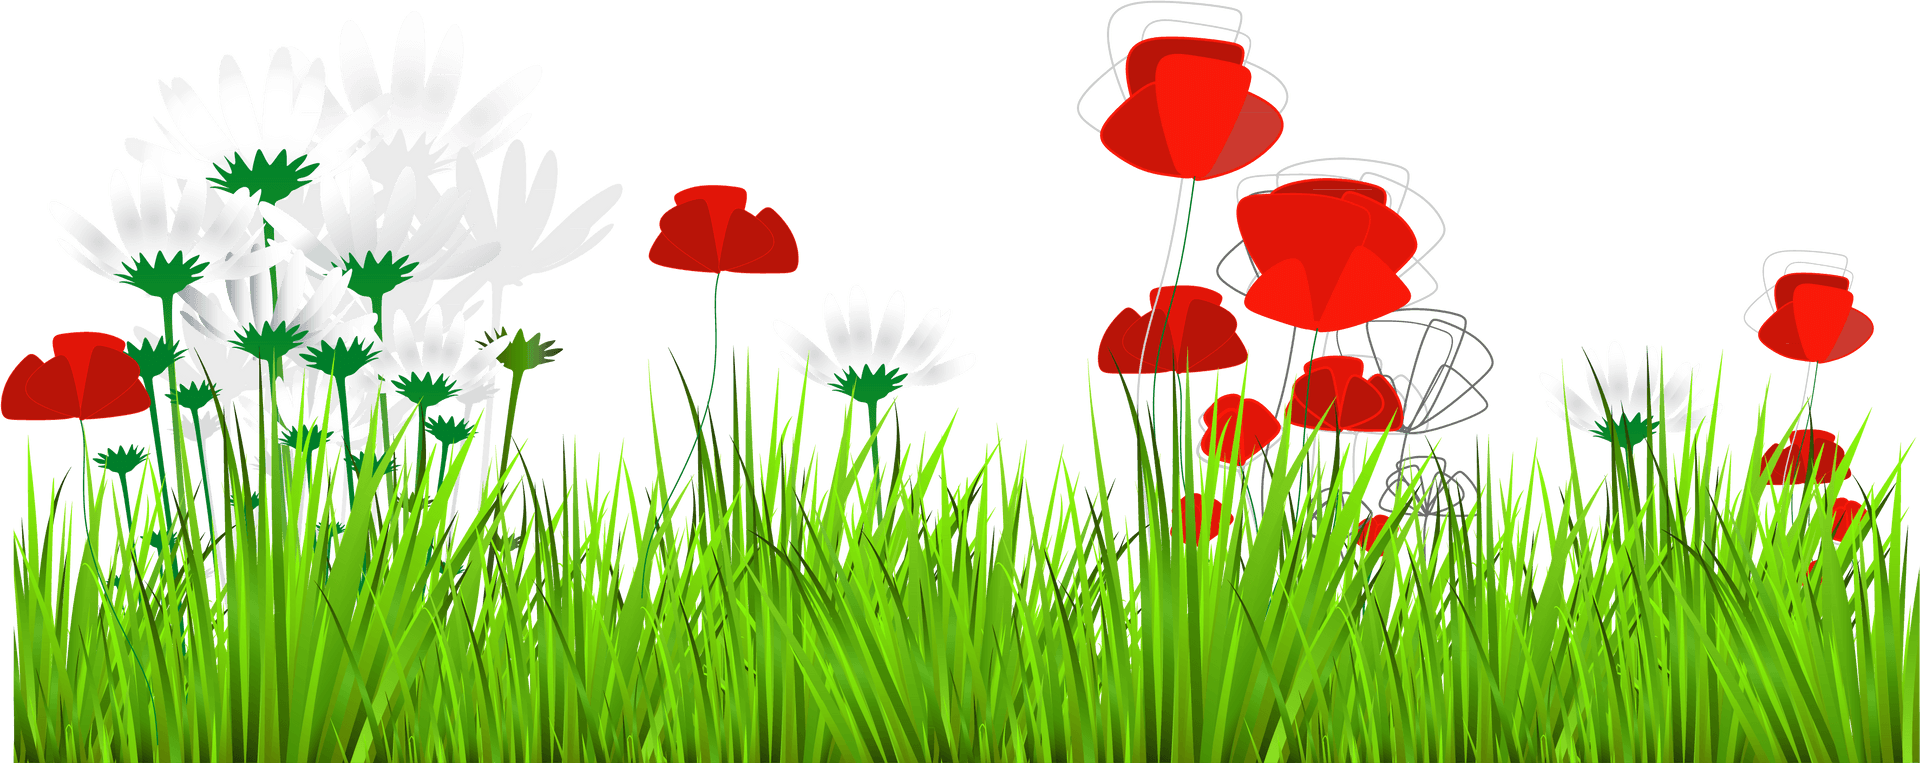 Red Poppiesand White Daisiesin Grass PNG